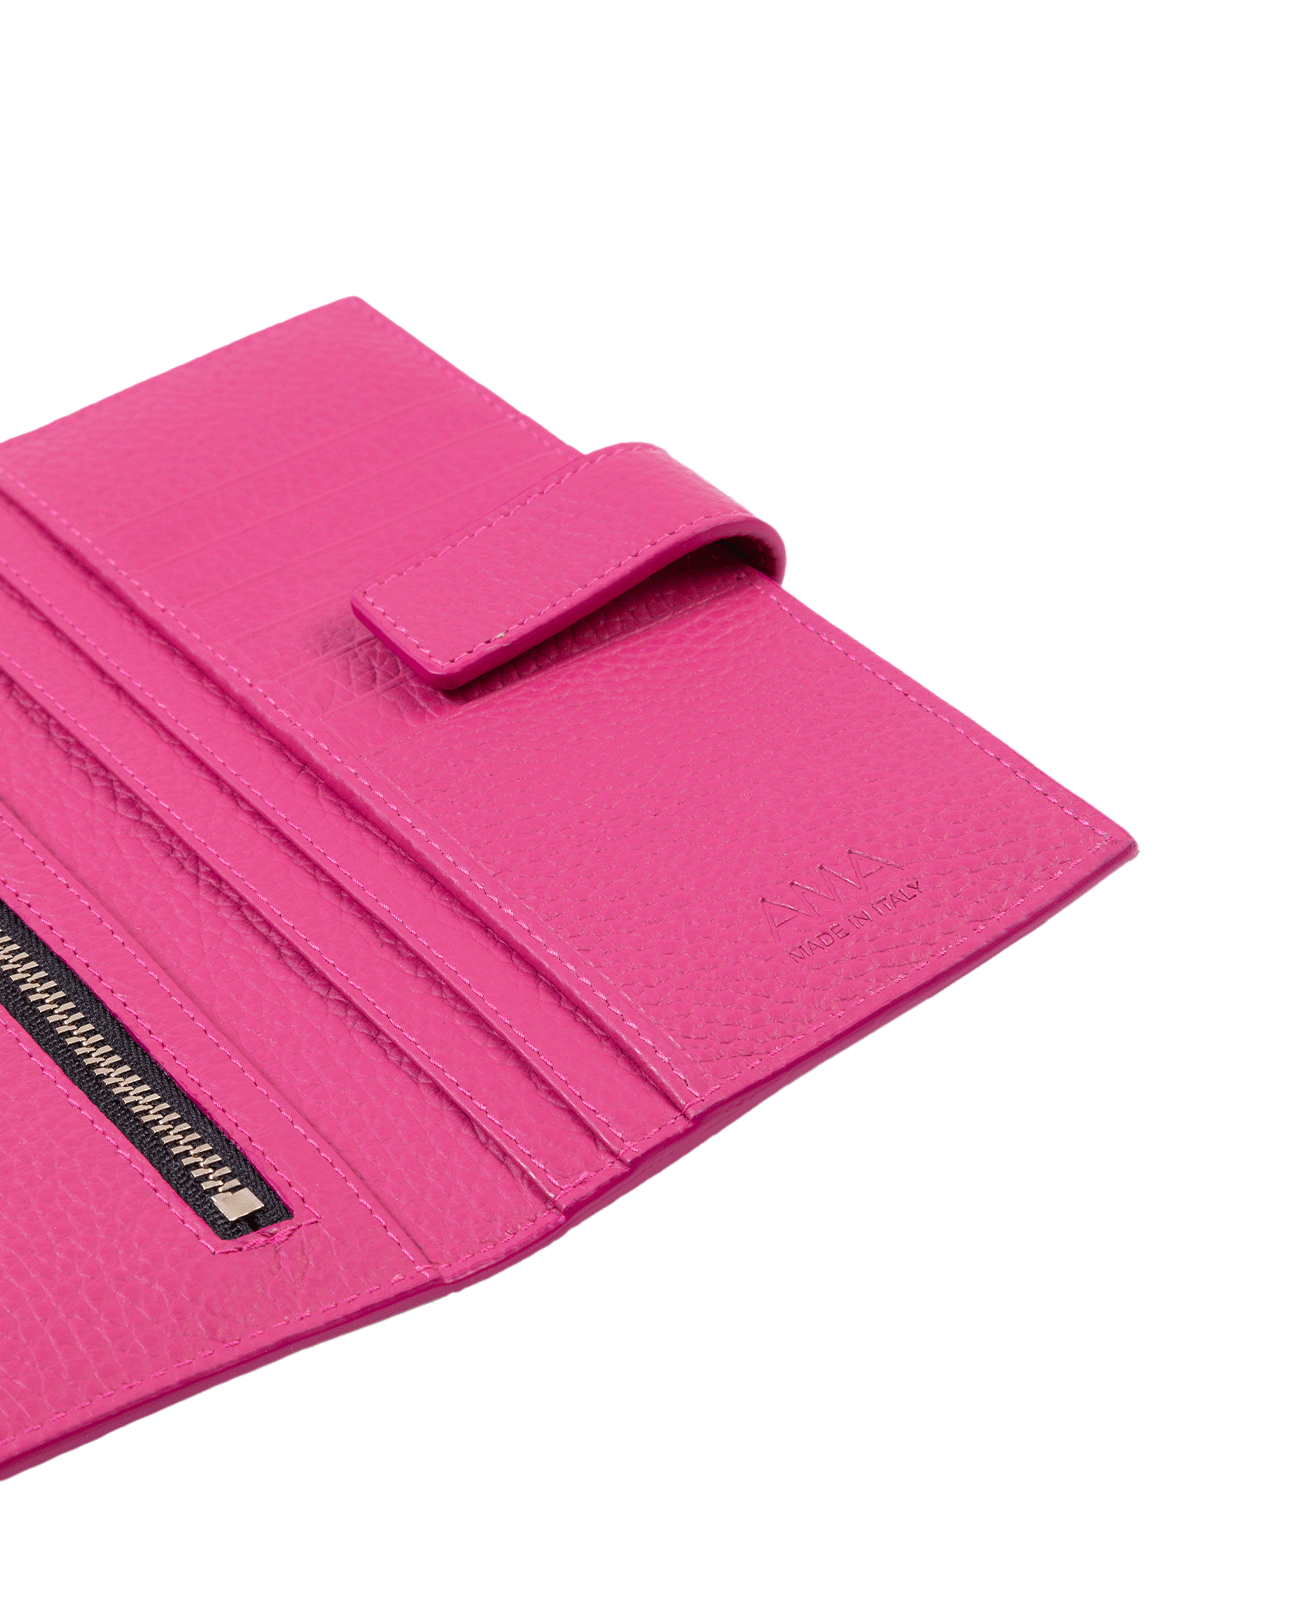 Wallet in Italian full-grain leather. Designed to carry your personal items. Available in a variety of styles. Color: Orchidea. Size: Medium